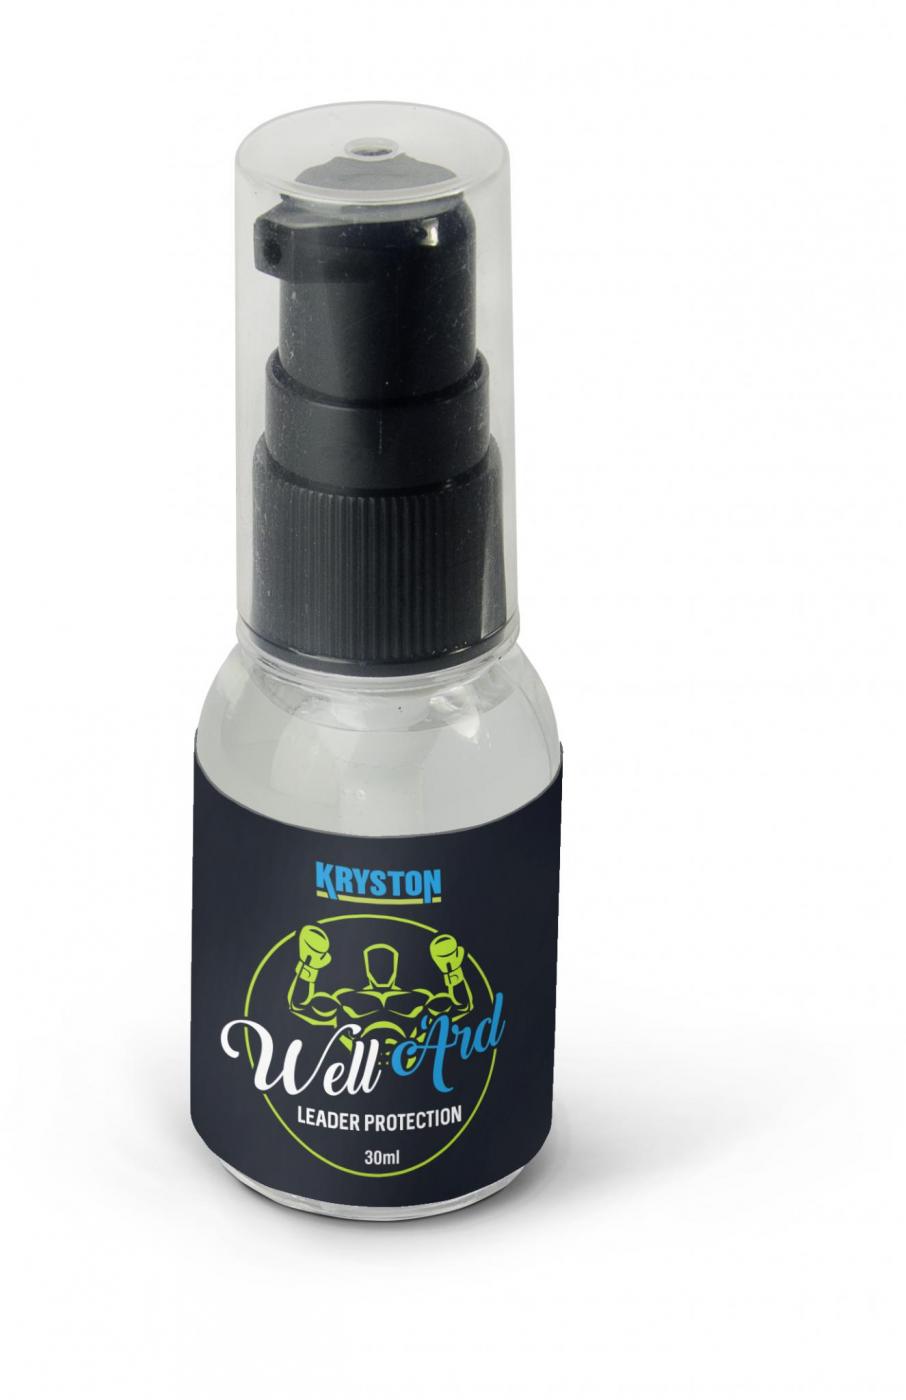 Kryston Well Ard Leader protection 30ml